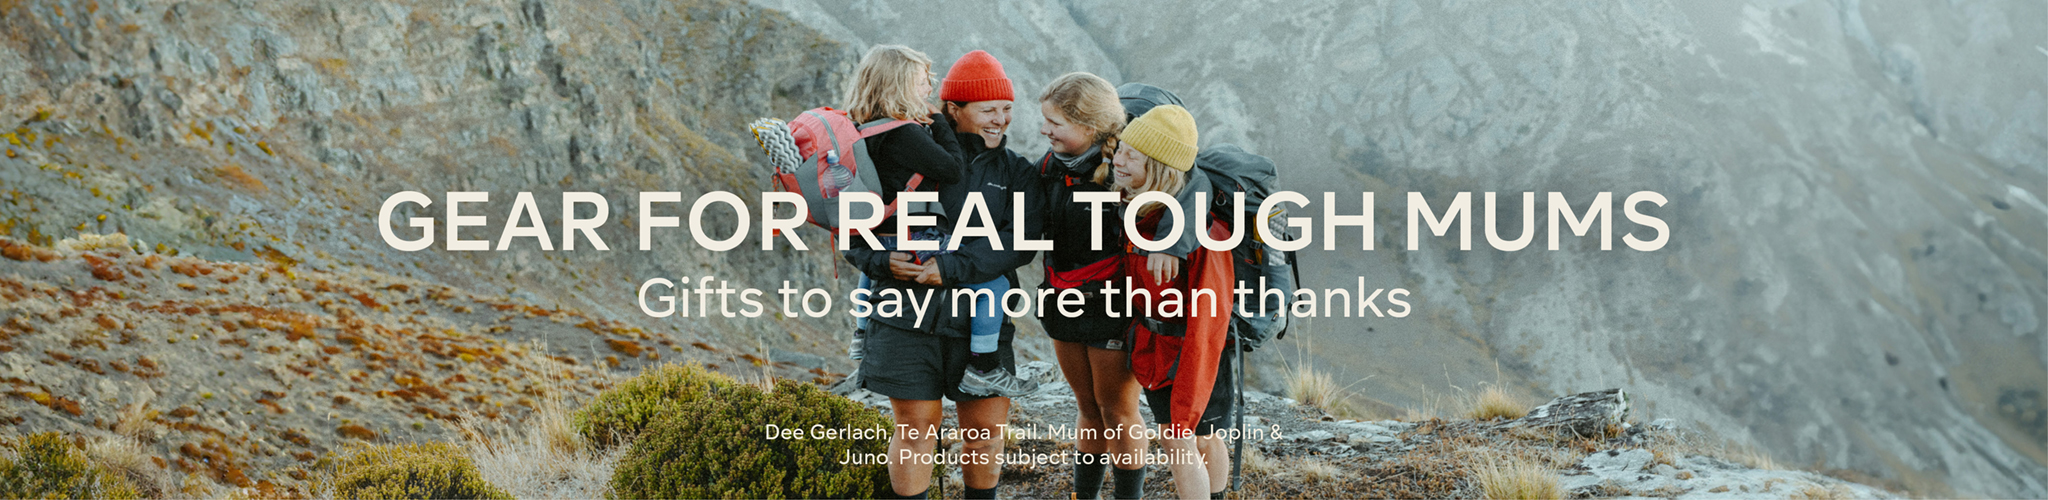 GEAR FOR REAL TOUGH MUMS  - GIFTS TO SAY MORE THAN THANKS